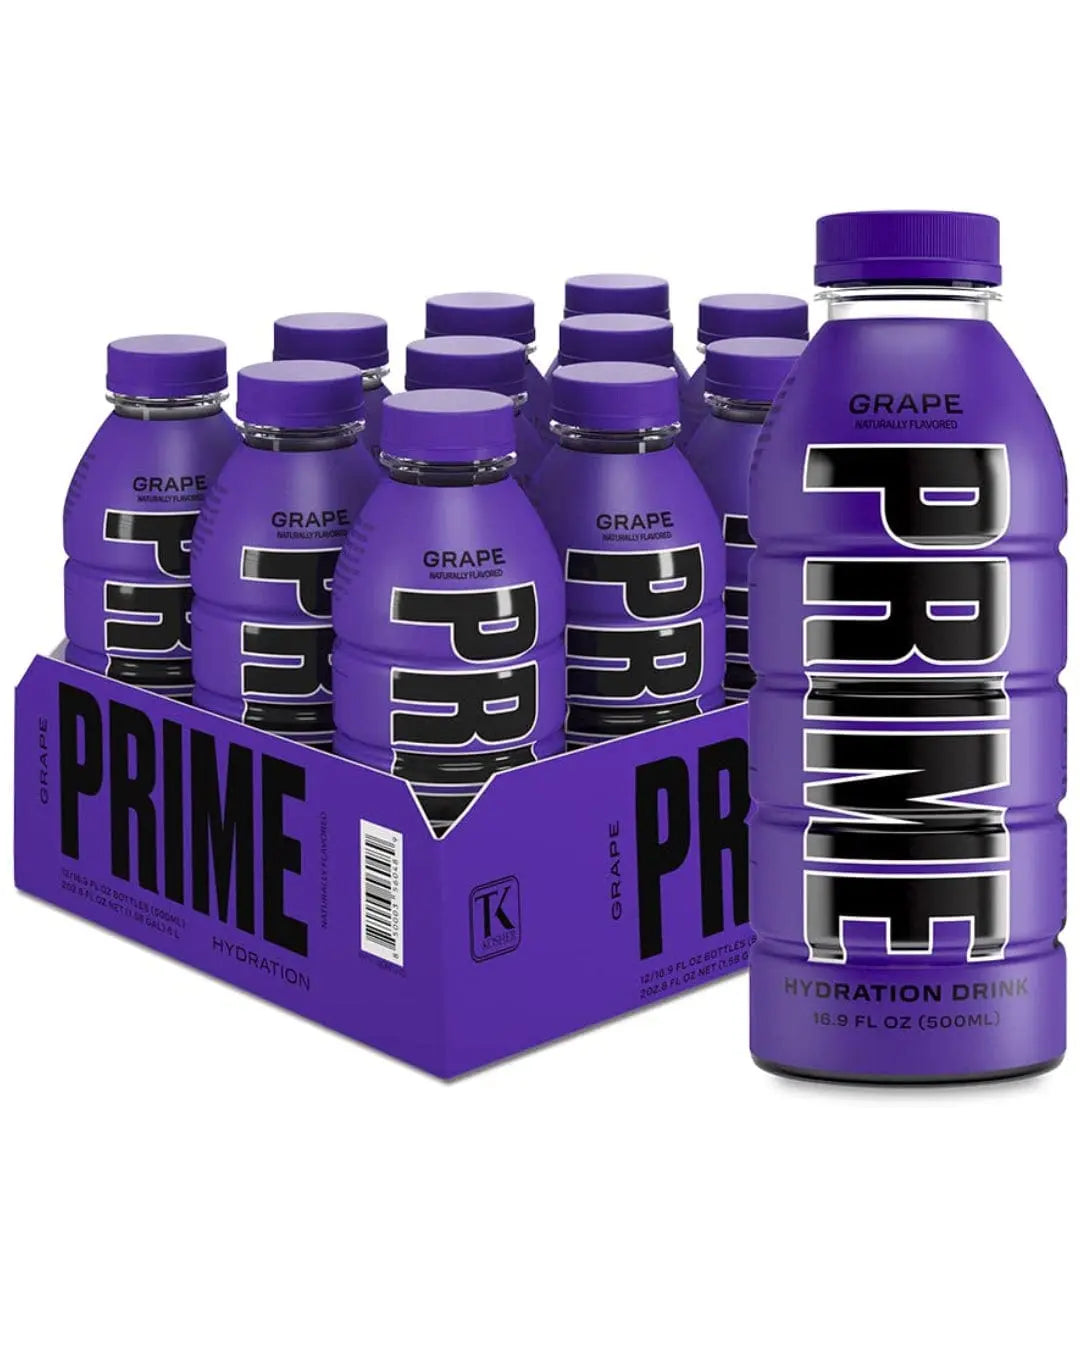 Prime Grape Hydration Drink Multipack, 12 x 500 ml Soft Drinks & Mixers